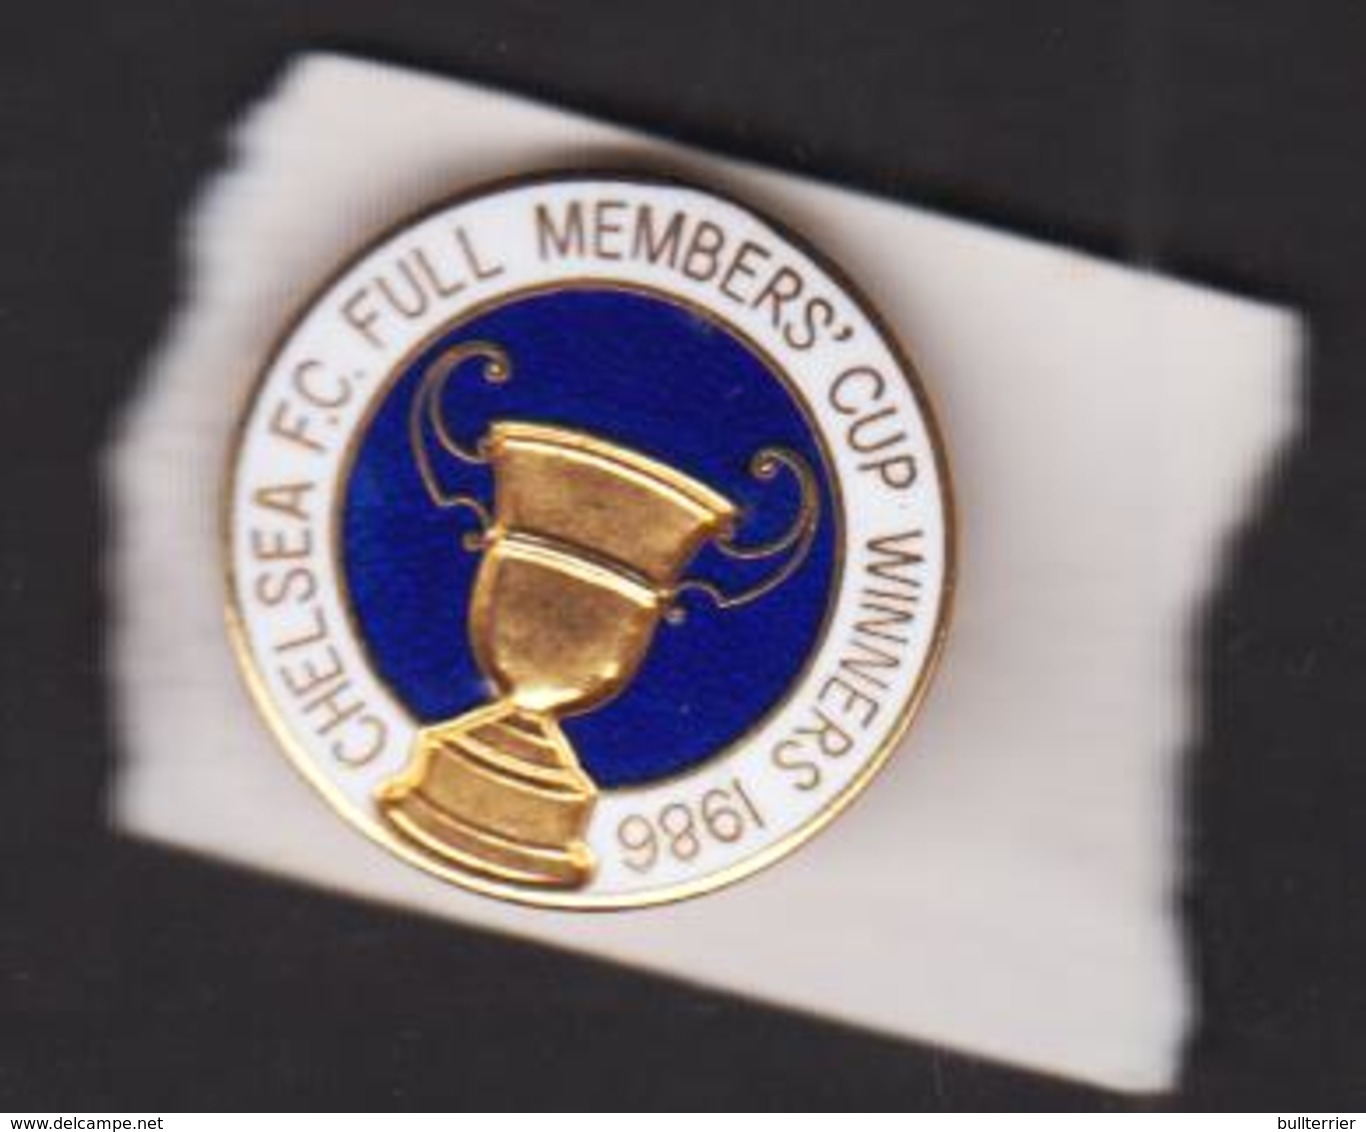 CHELSEA - 1986 - FUL MEMBERS CUP WINNERS  1 INCH DIAMETER  BADGE  - SUPERB CONDITION - Football